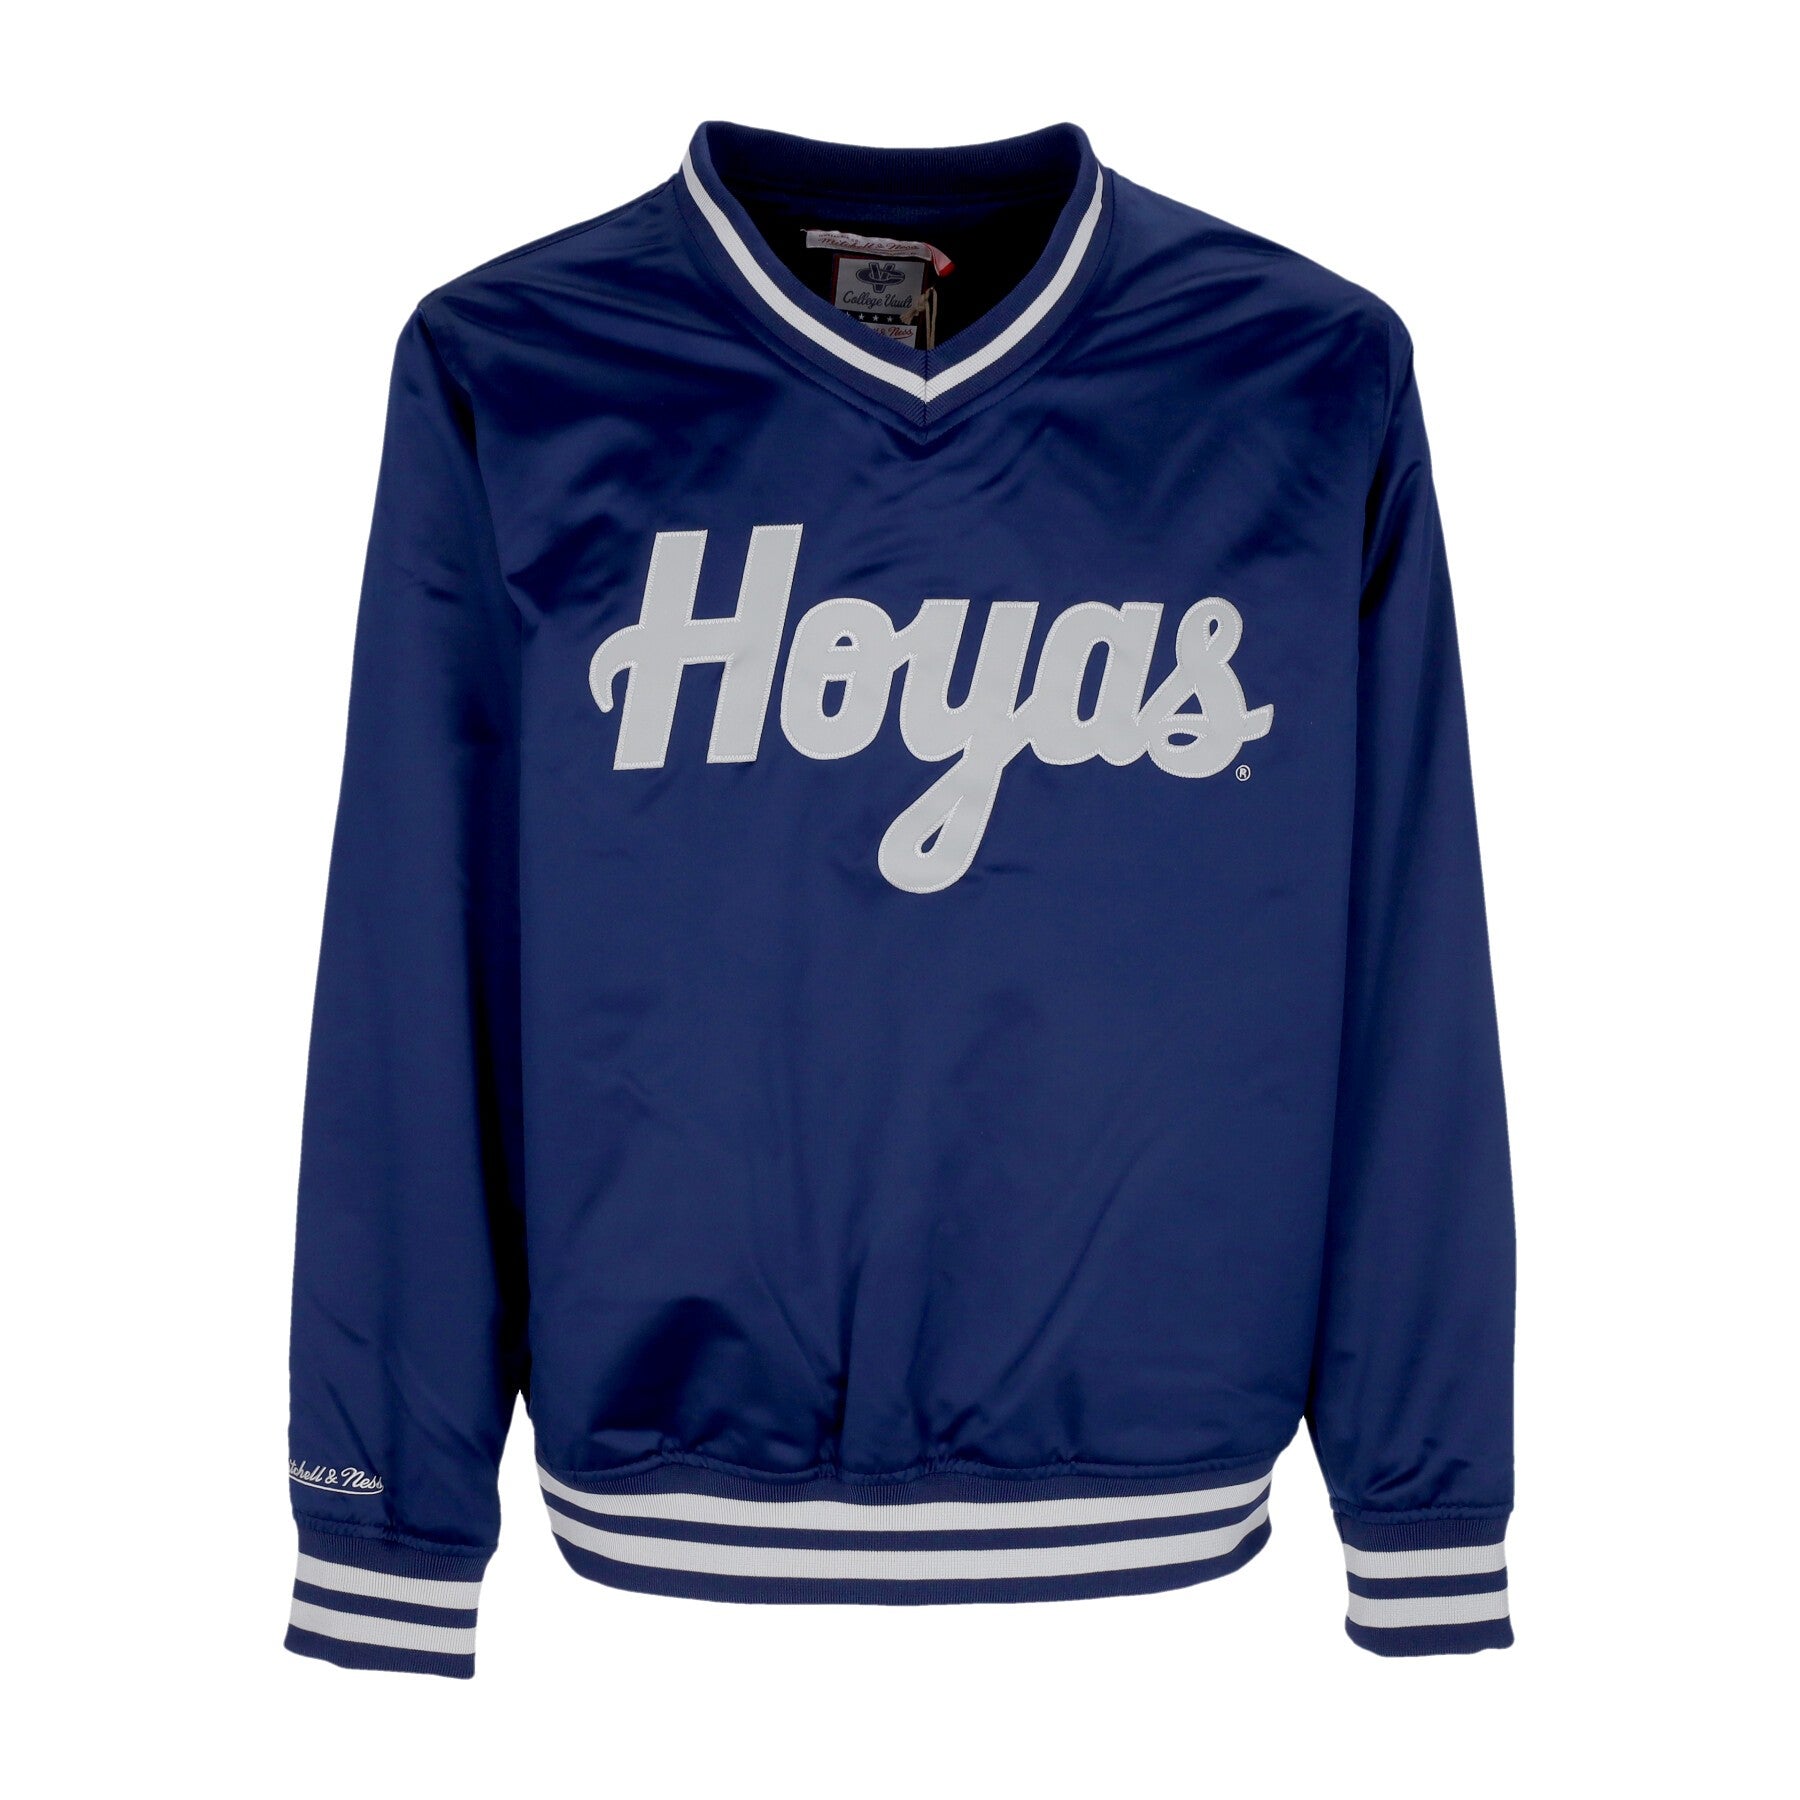 Mitchell & Ness, Casacca Uomo Ncaa Sideline Pullover Satin Jacket Geohoy, Navy